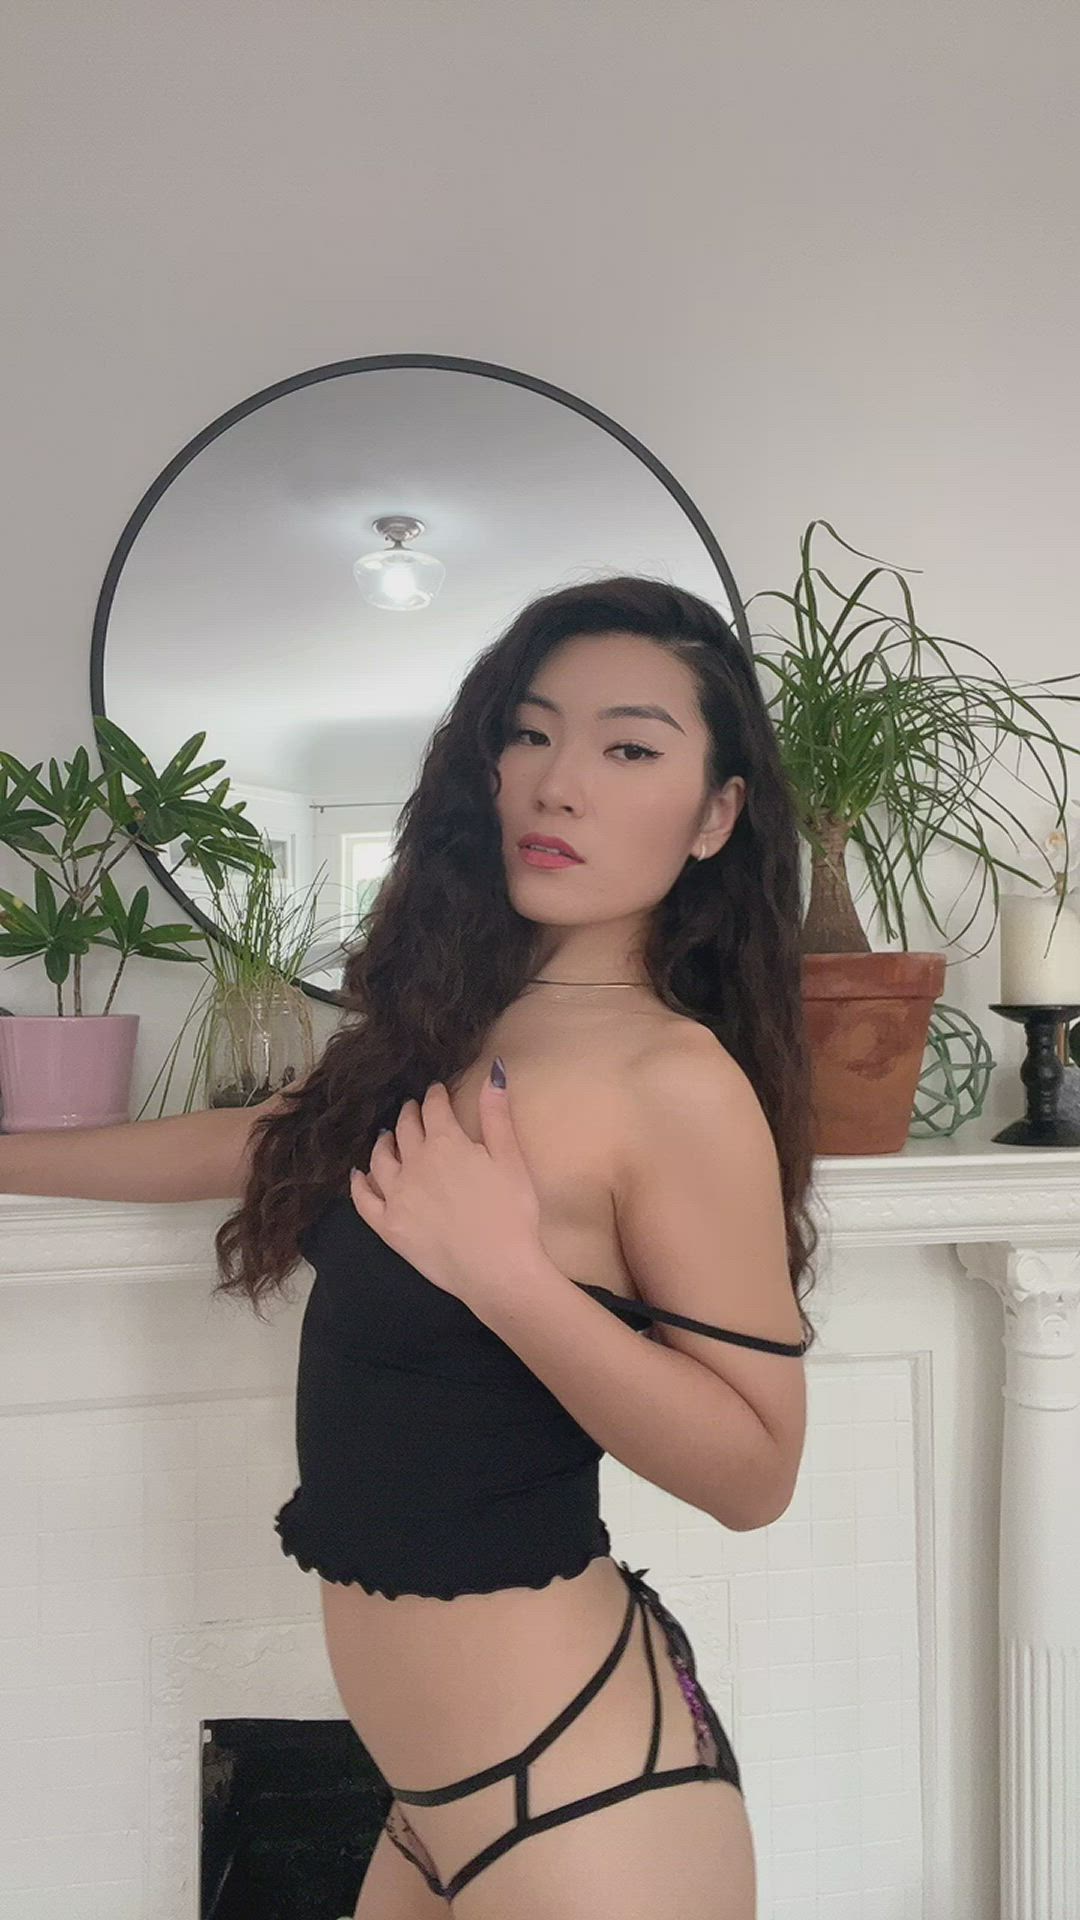 Asian porn video with onlyfans model hotvirgo <strong>@hot.virgo</strong>